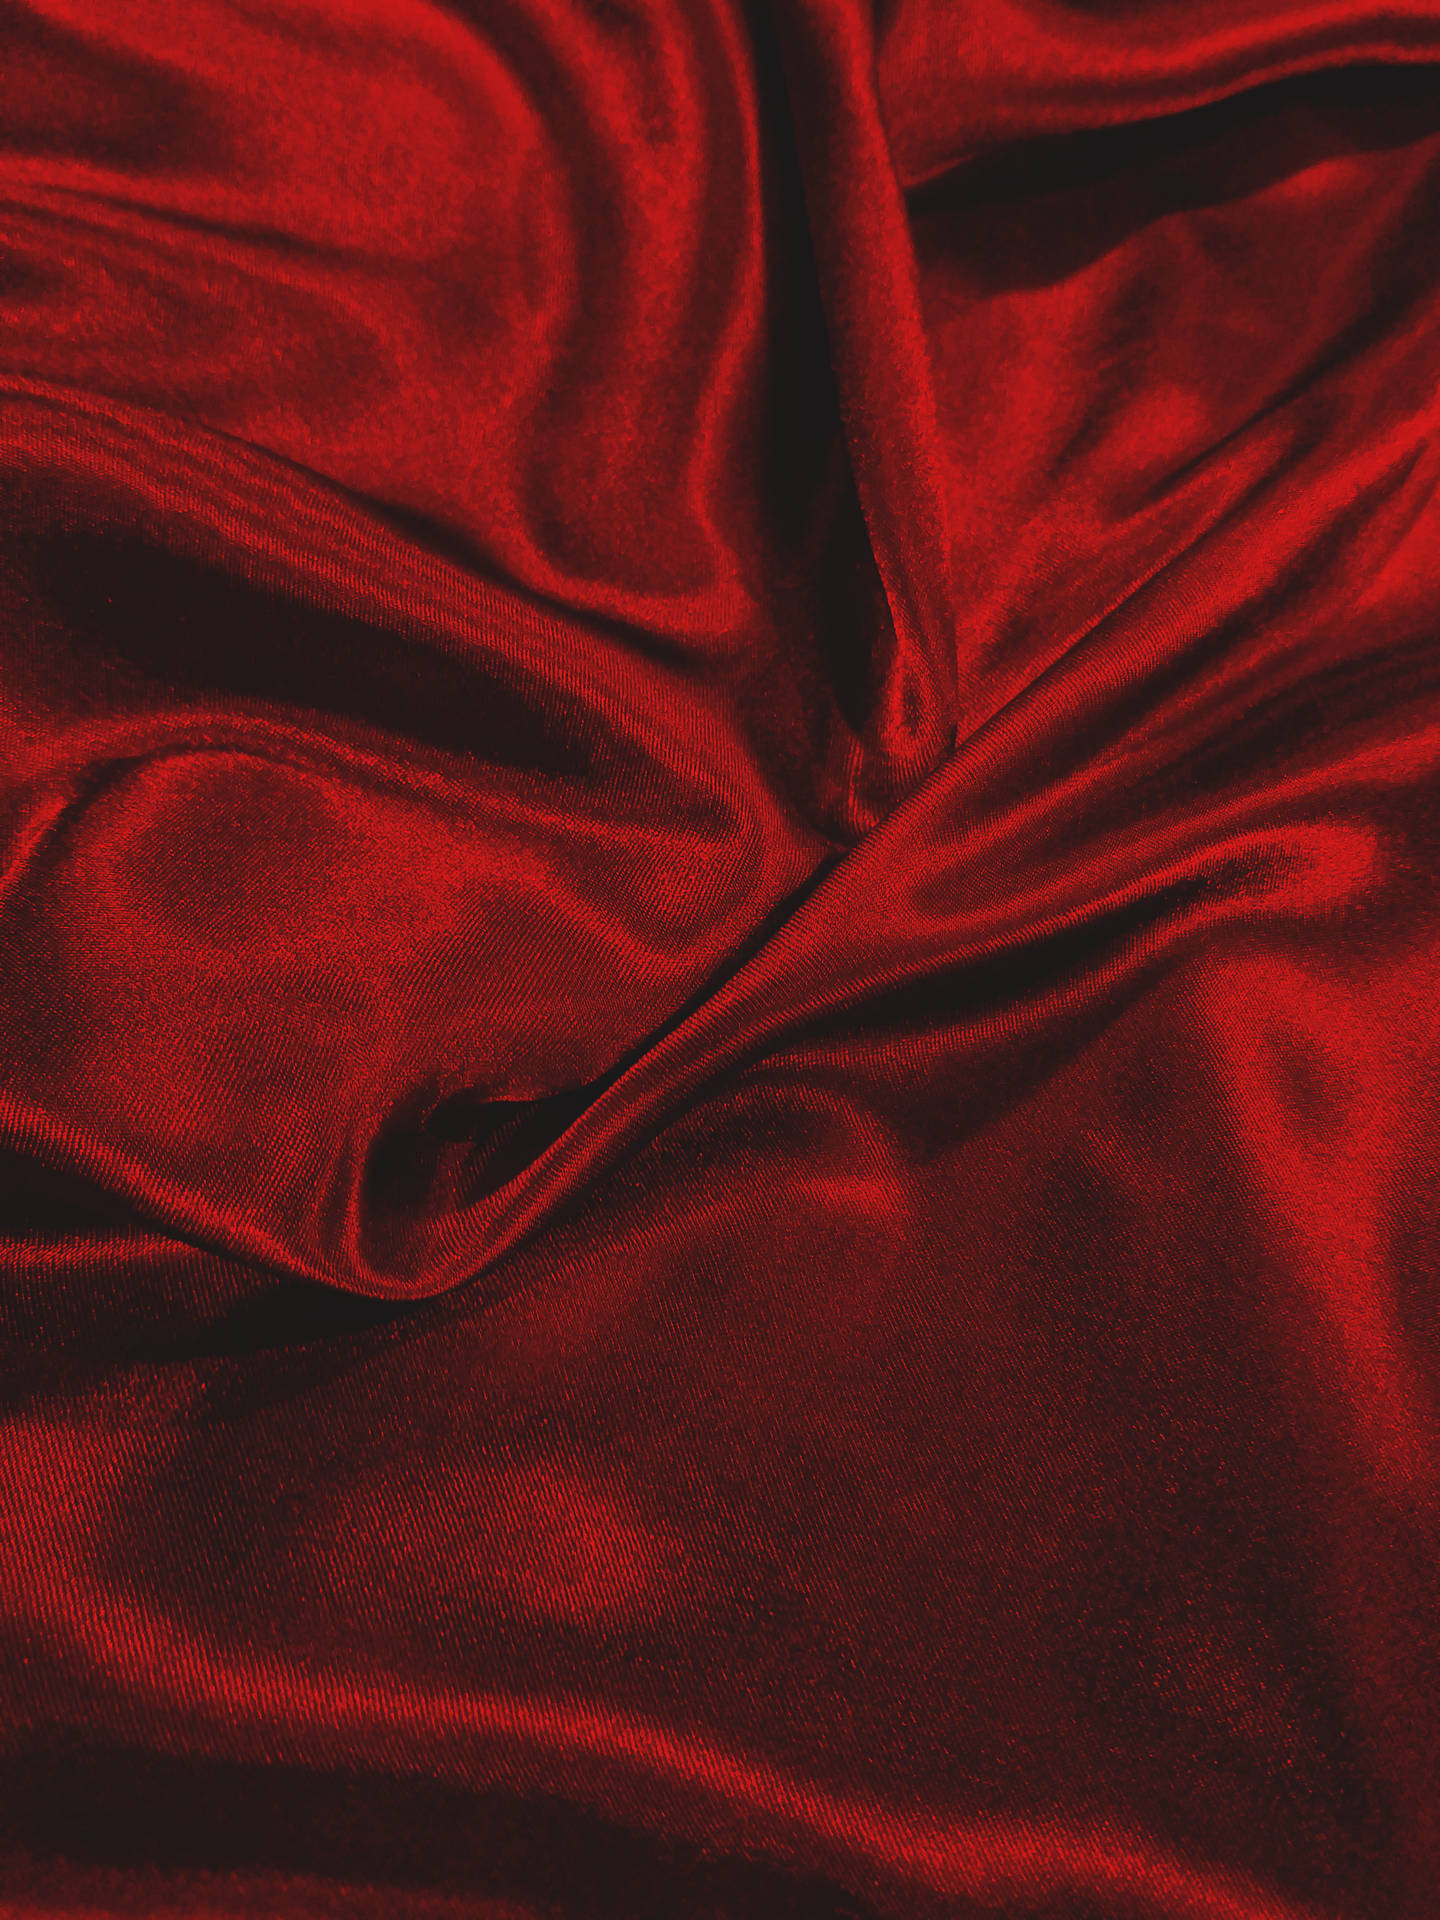 Red Satin Silky Texture Background